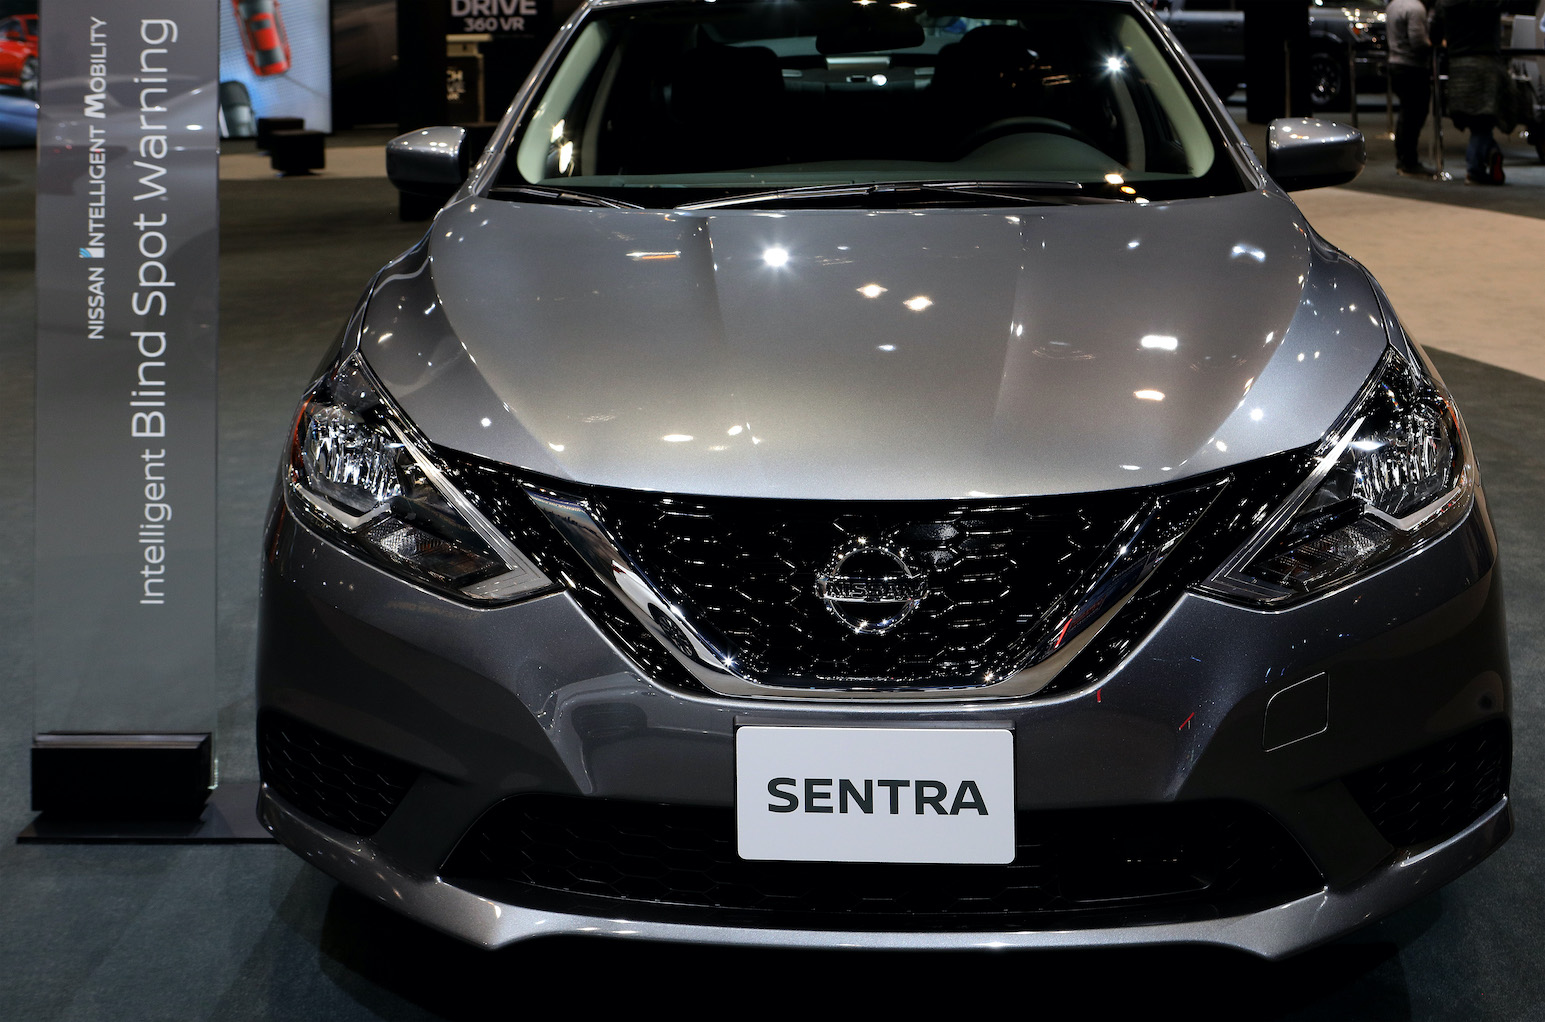 2019 Nissan Sentra is on display at the 111th Annual Chicago Auto Show